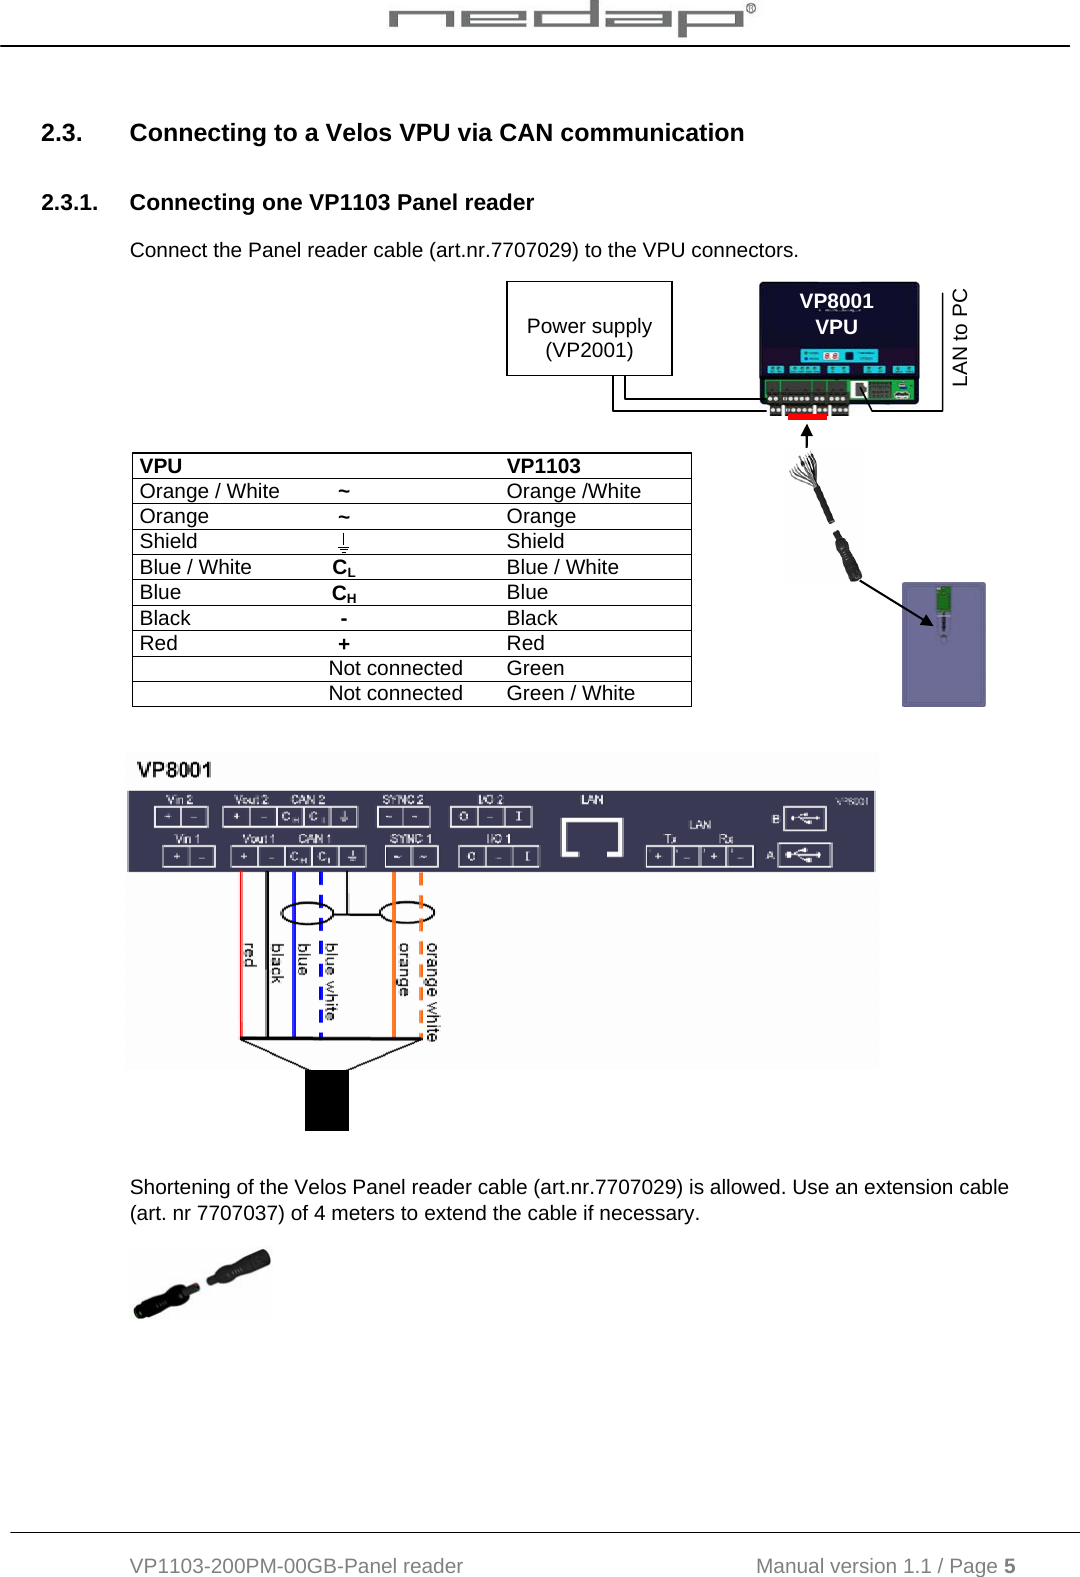  VP1103-200PM-00GB-Panel reader                                           Manual version 1.1 / Page 5  2.3.  Connecting to a Velos VPU via CAN communication 2.3.1.  Connecting one VP1103 Panel reader Connect the Panel reader cable (art.nr.7707029) to the VPU connectors.                     Shortening of the Velos Panel reader cable (art.nr.7707029) is allowed. Use an extension cable (art. nr 7707037) of 4 meters to extend the cable if necessary.   VPU   VP1103 Orange / White  ~  Orange /White Orange  ~  Orange Shield    Shield Blue / White  CL  Blue / White Blue  CH  Blue Black  -  Black Red  +  Red  Not connected Green  Not connected Green / White VP8001 VPU  Power supply (VP2001) LAN to PC 